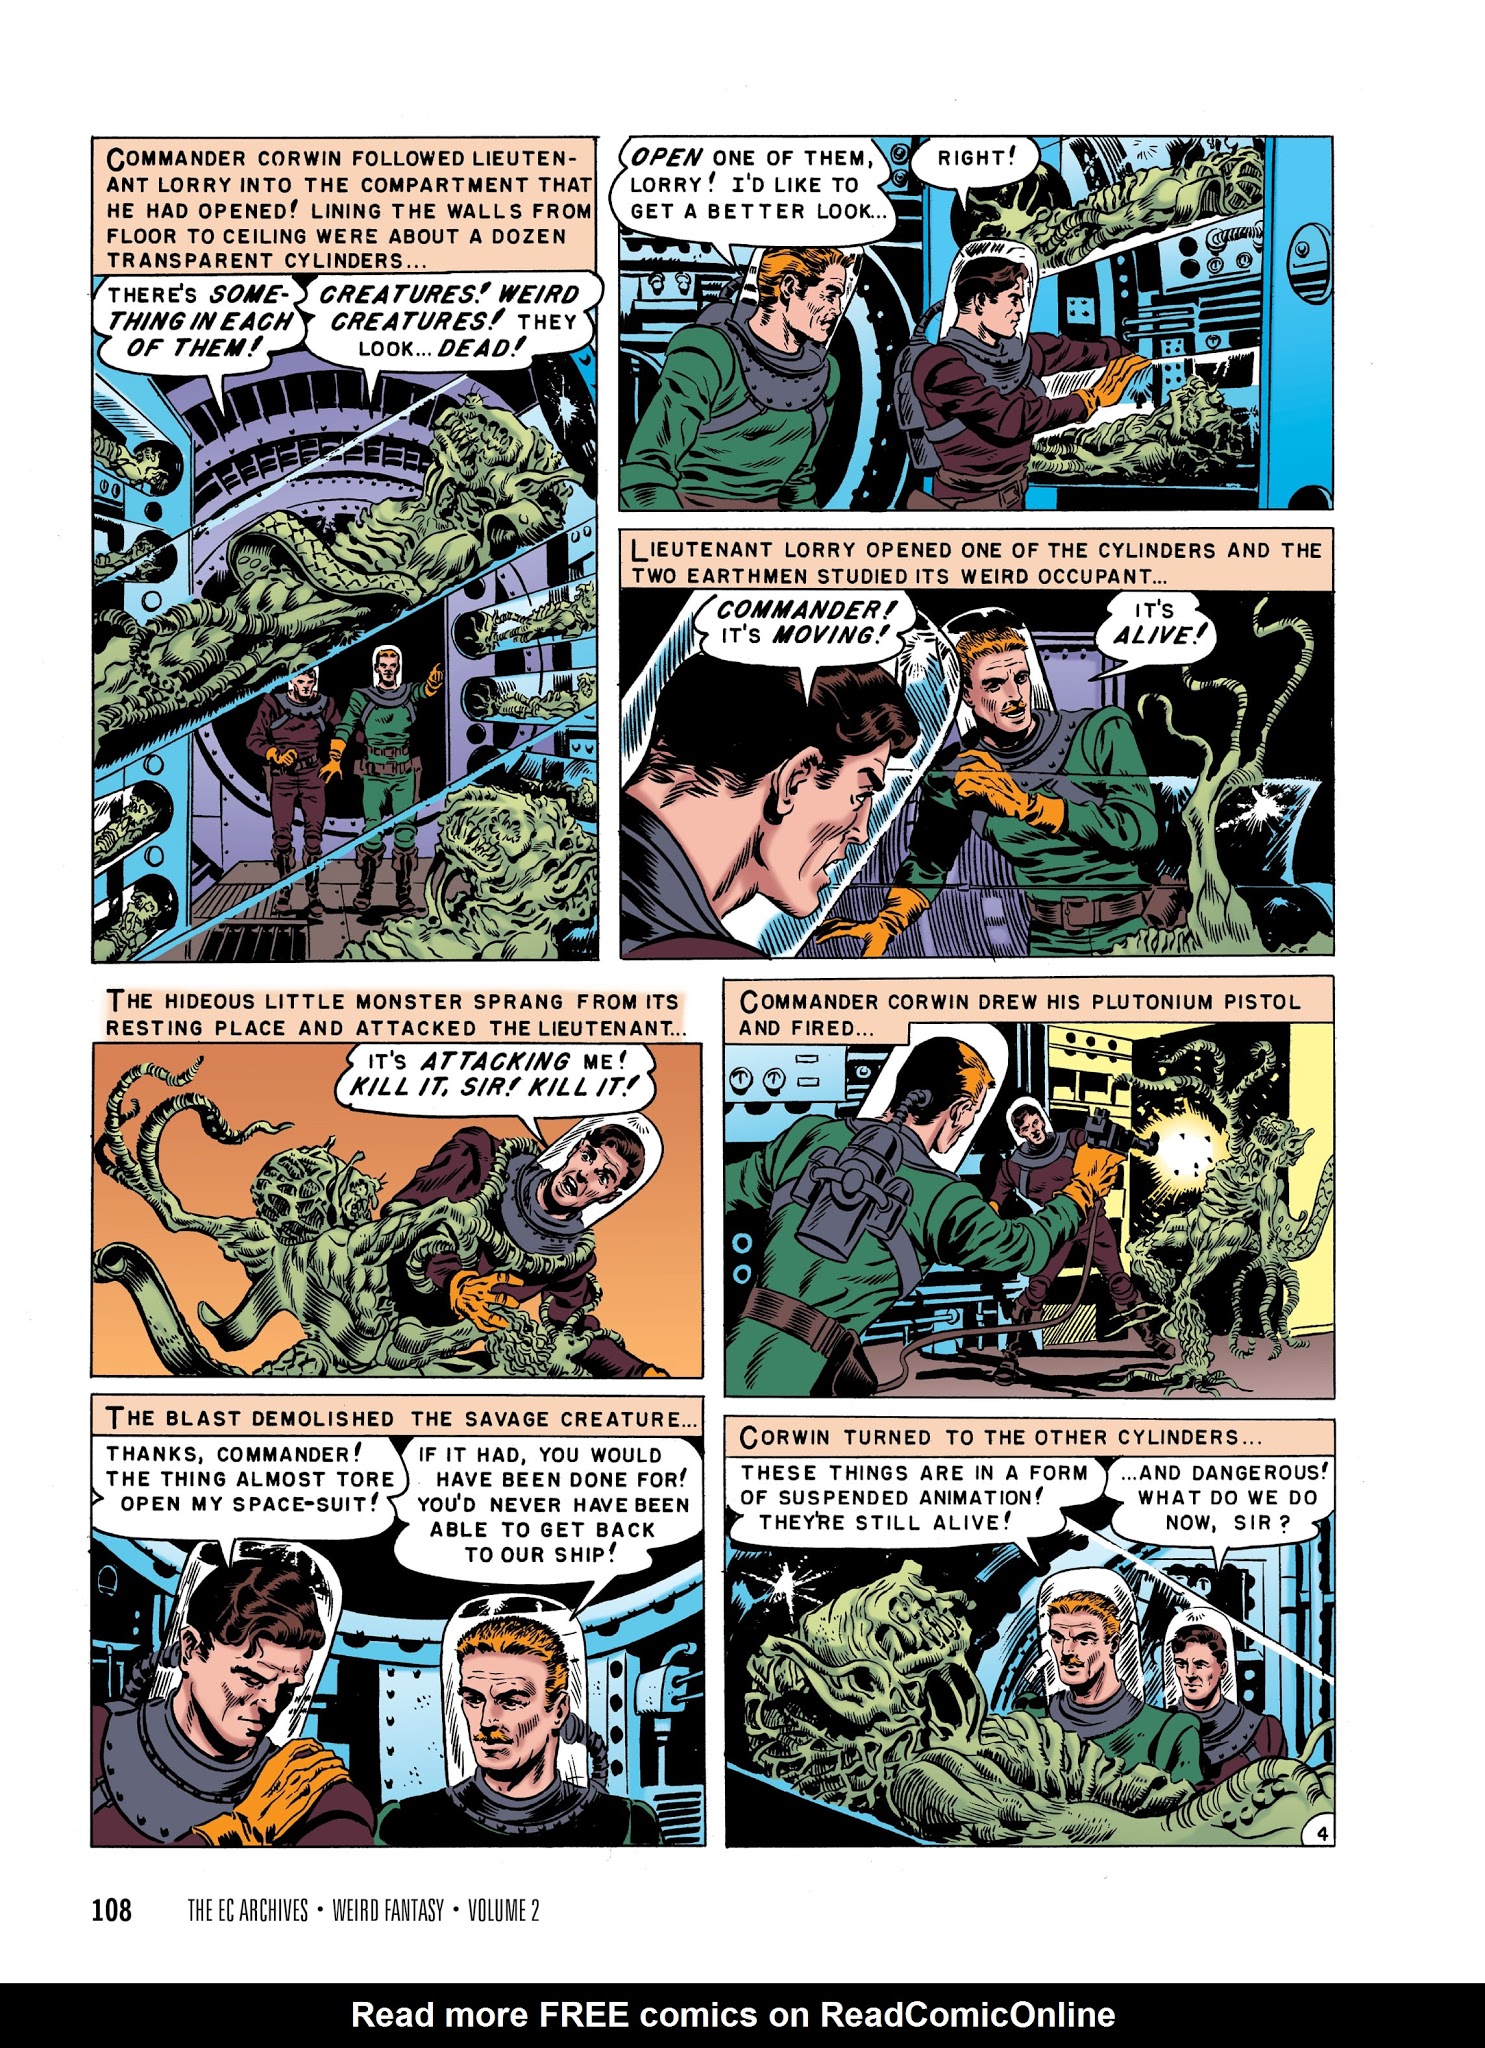 Read online The EC Archives: Weird Fantasy comic -  Issue # TPB 2 - 110